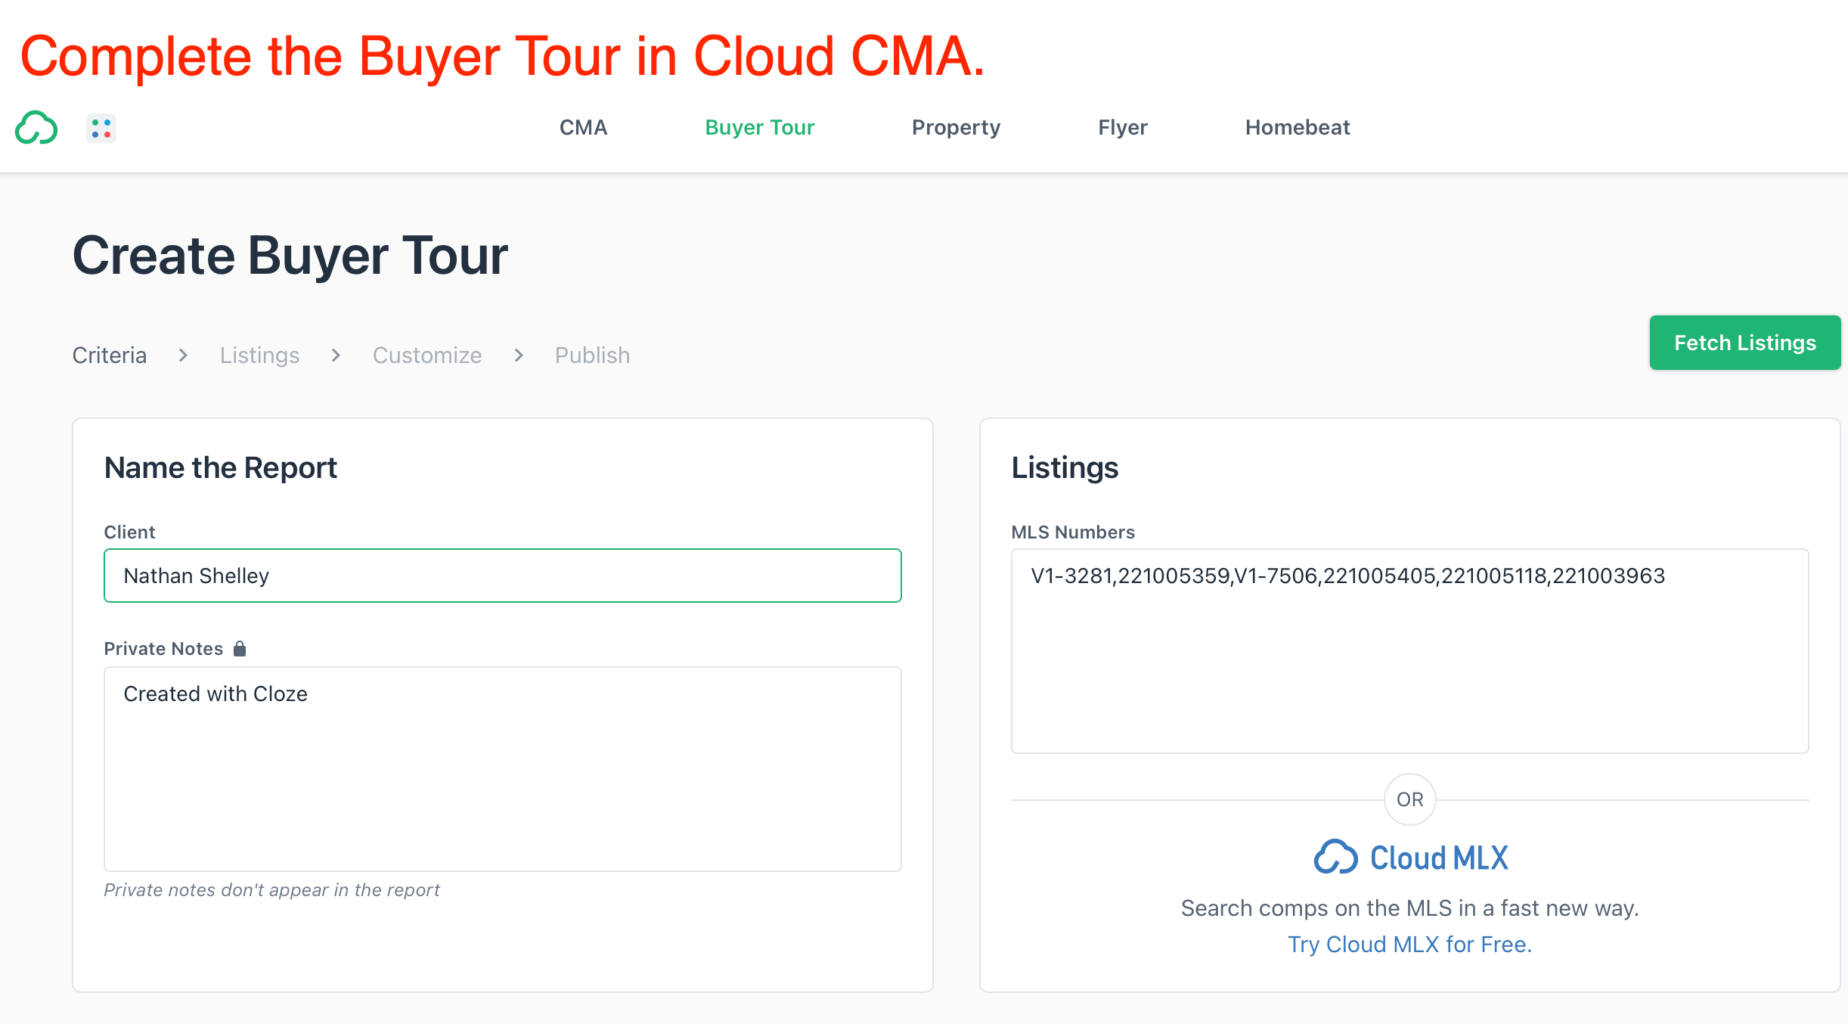 Complete the buyer tour in Cloud CMA.